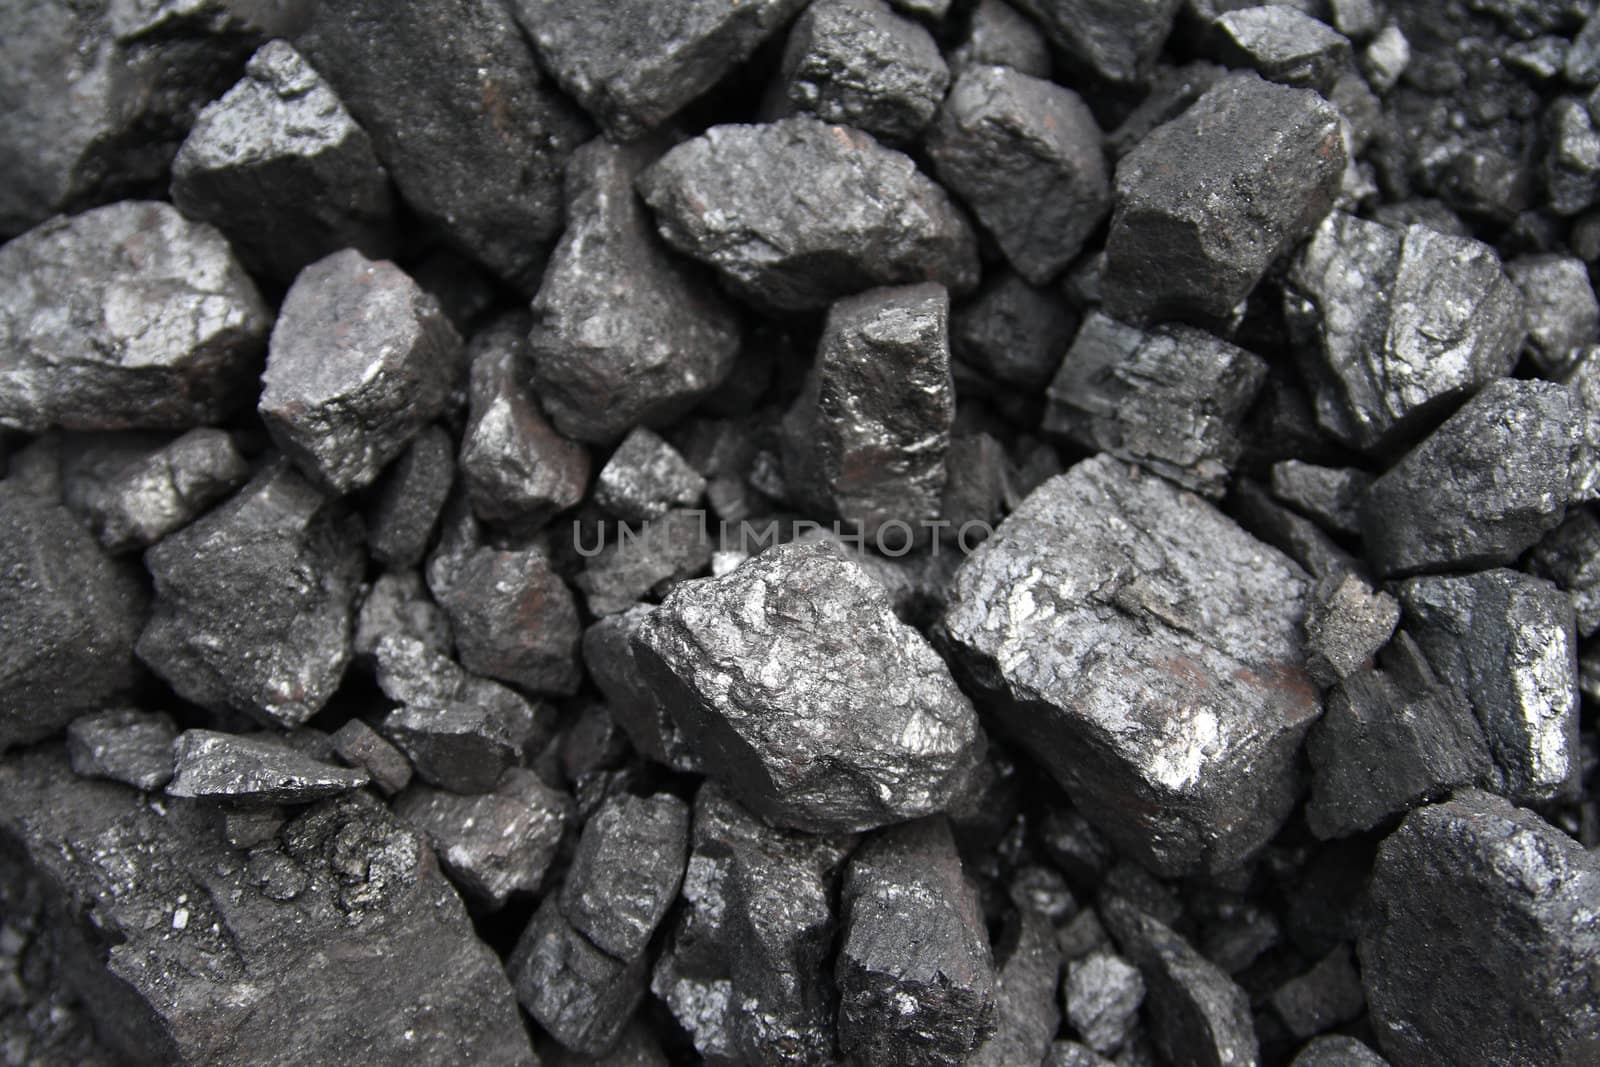 close up of black and shiny coal